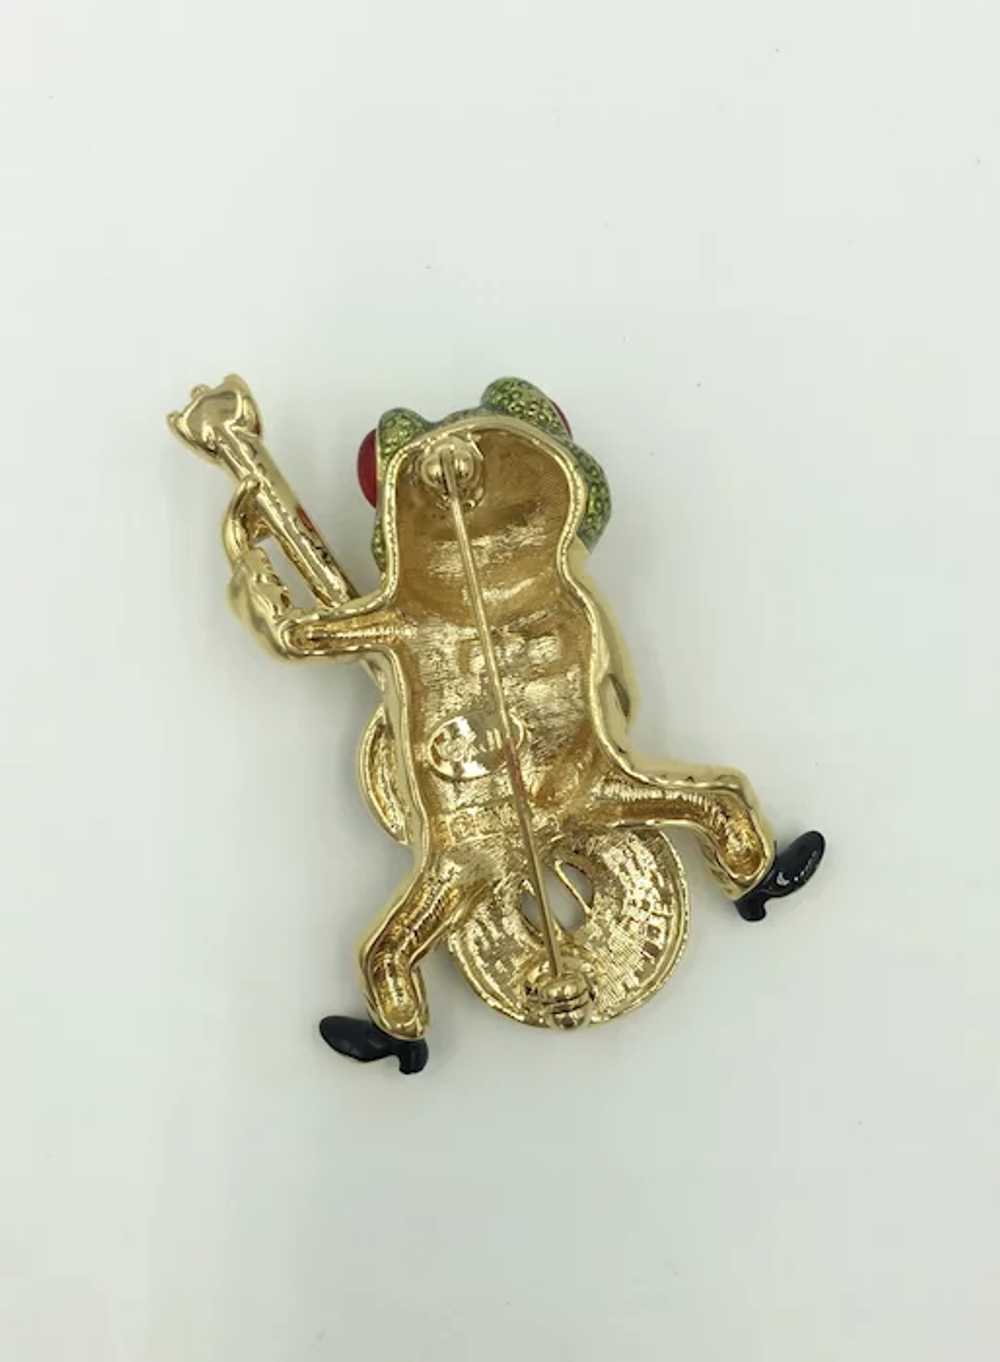 Cellin 14K Yellow Gold and Enamel Green Frog Pin Brooch